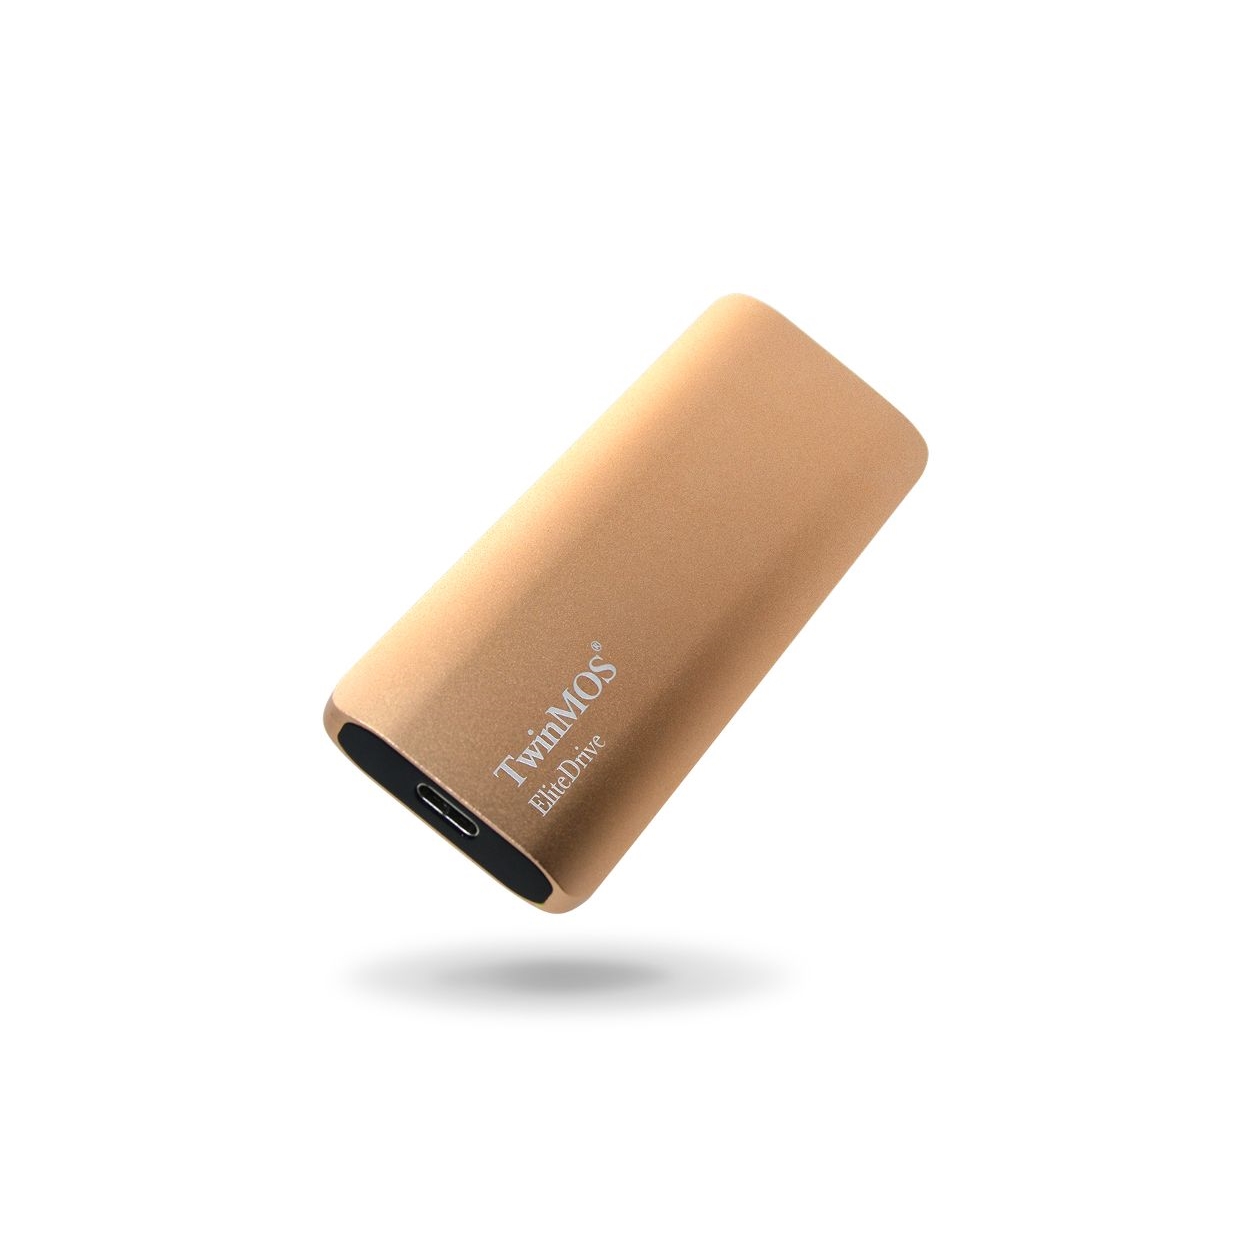 TWINMOS%20EXTERNAL%20SSD%20512GB%20USB3.2/TYPE-C%20GOLD%20HARICI%20SSD%20PSSDFGBMED32-G